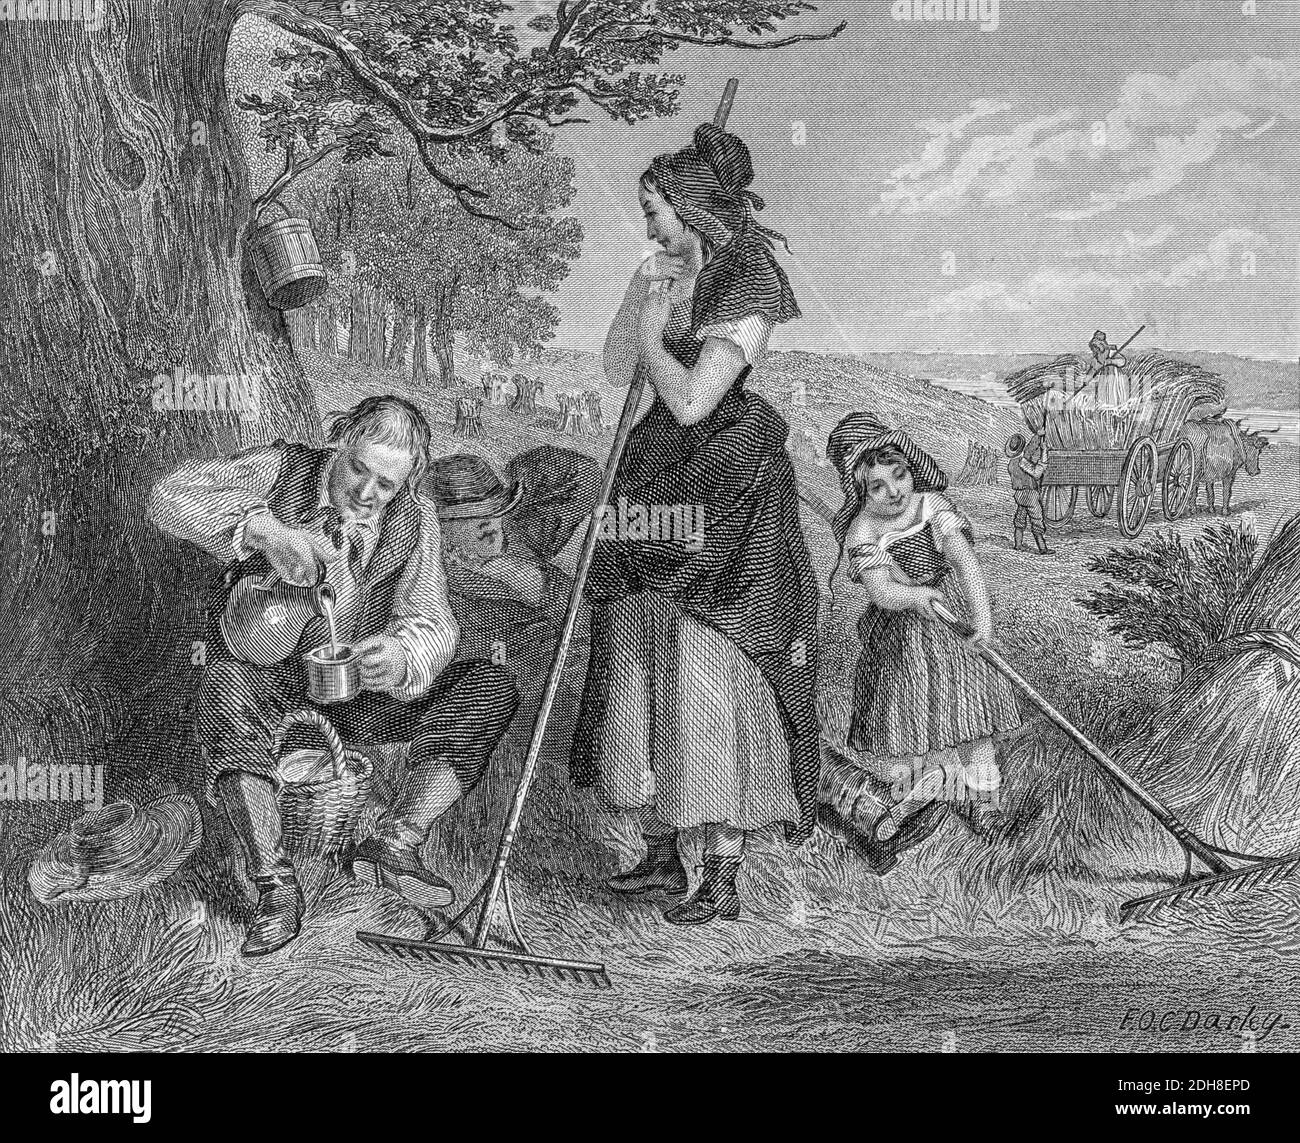 Summer Harvest family working the fields Steel engraving from Godey's Lady's Book and Magazine, Vol 101 July to December 1880 in Philadelphia Stock Photo